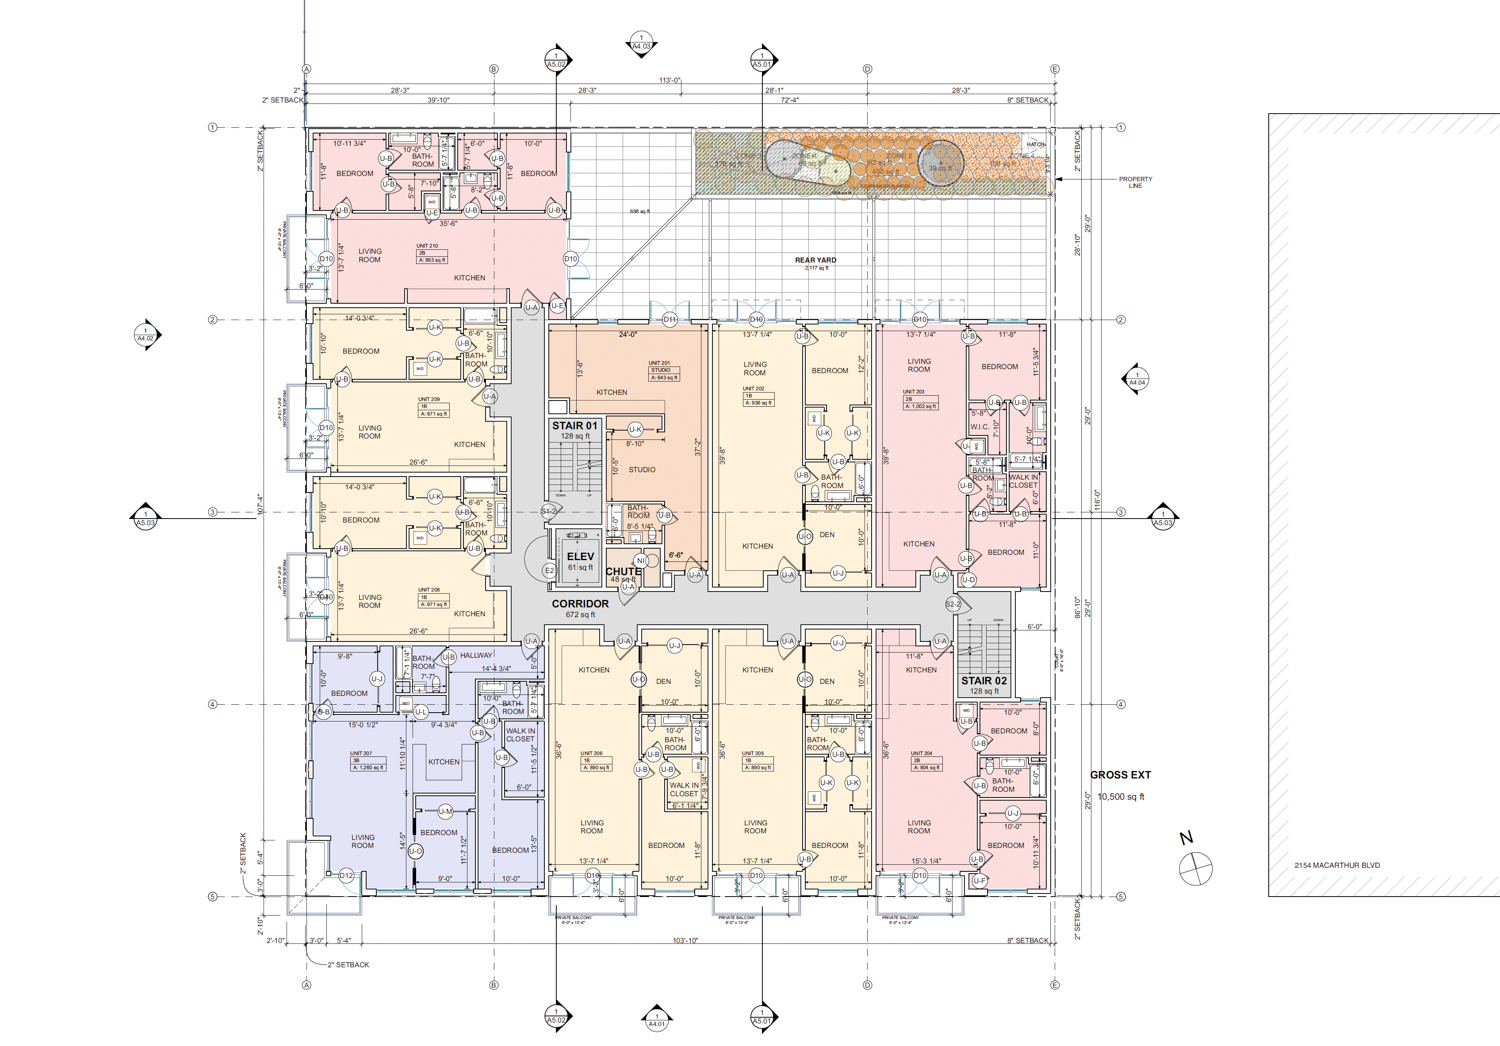 2114 MacArthur Boulevard second-level floor plan, rendering by RG Architecture